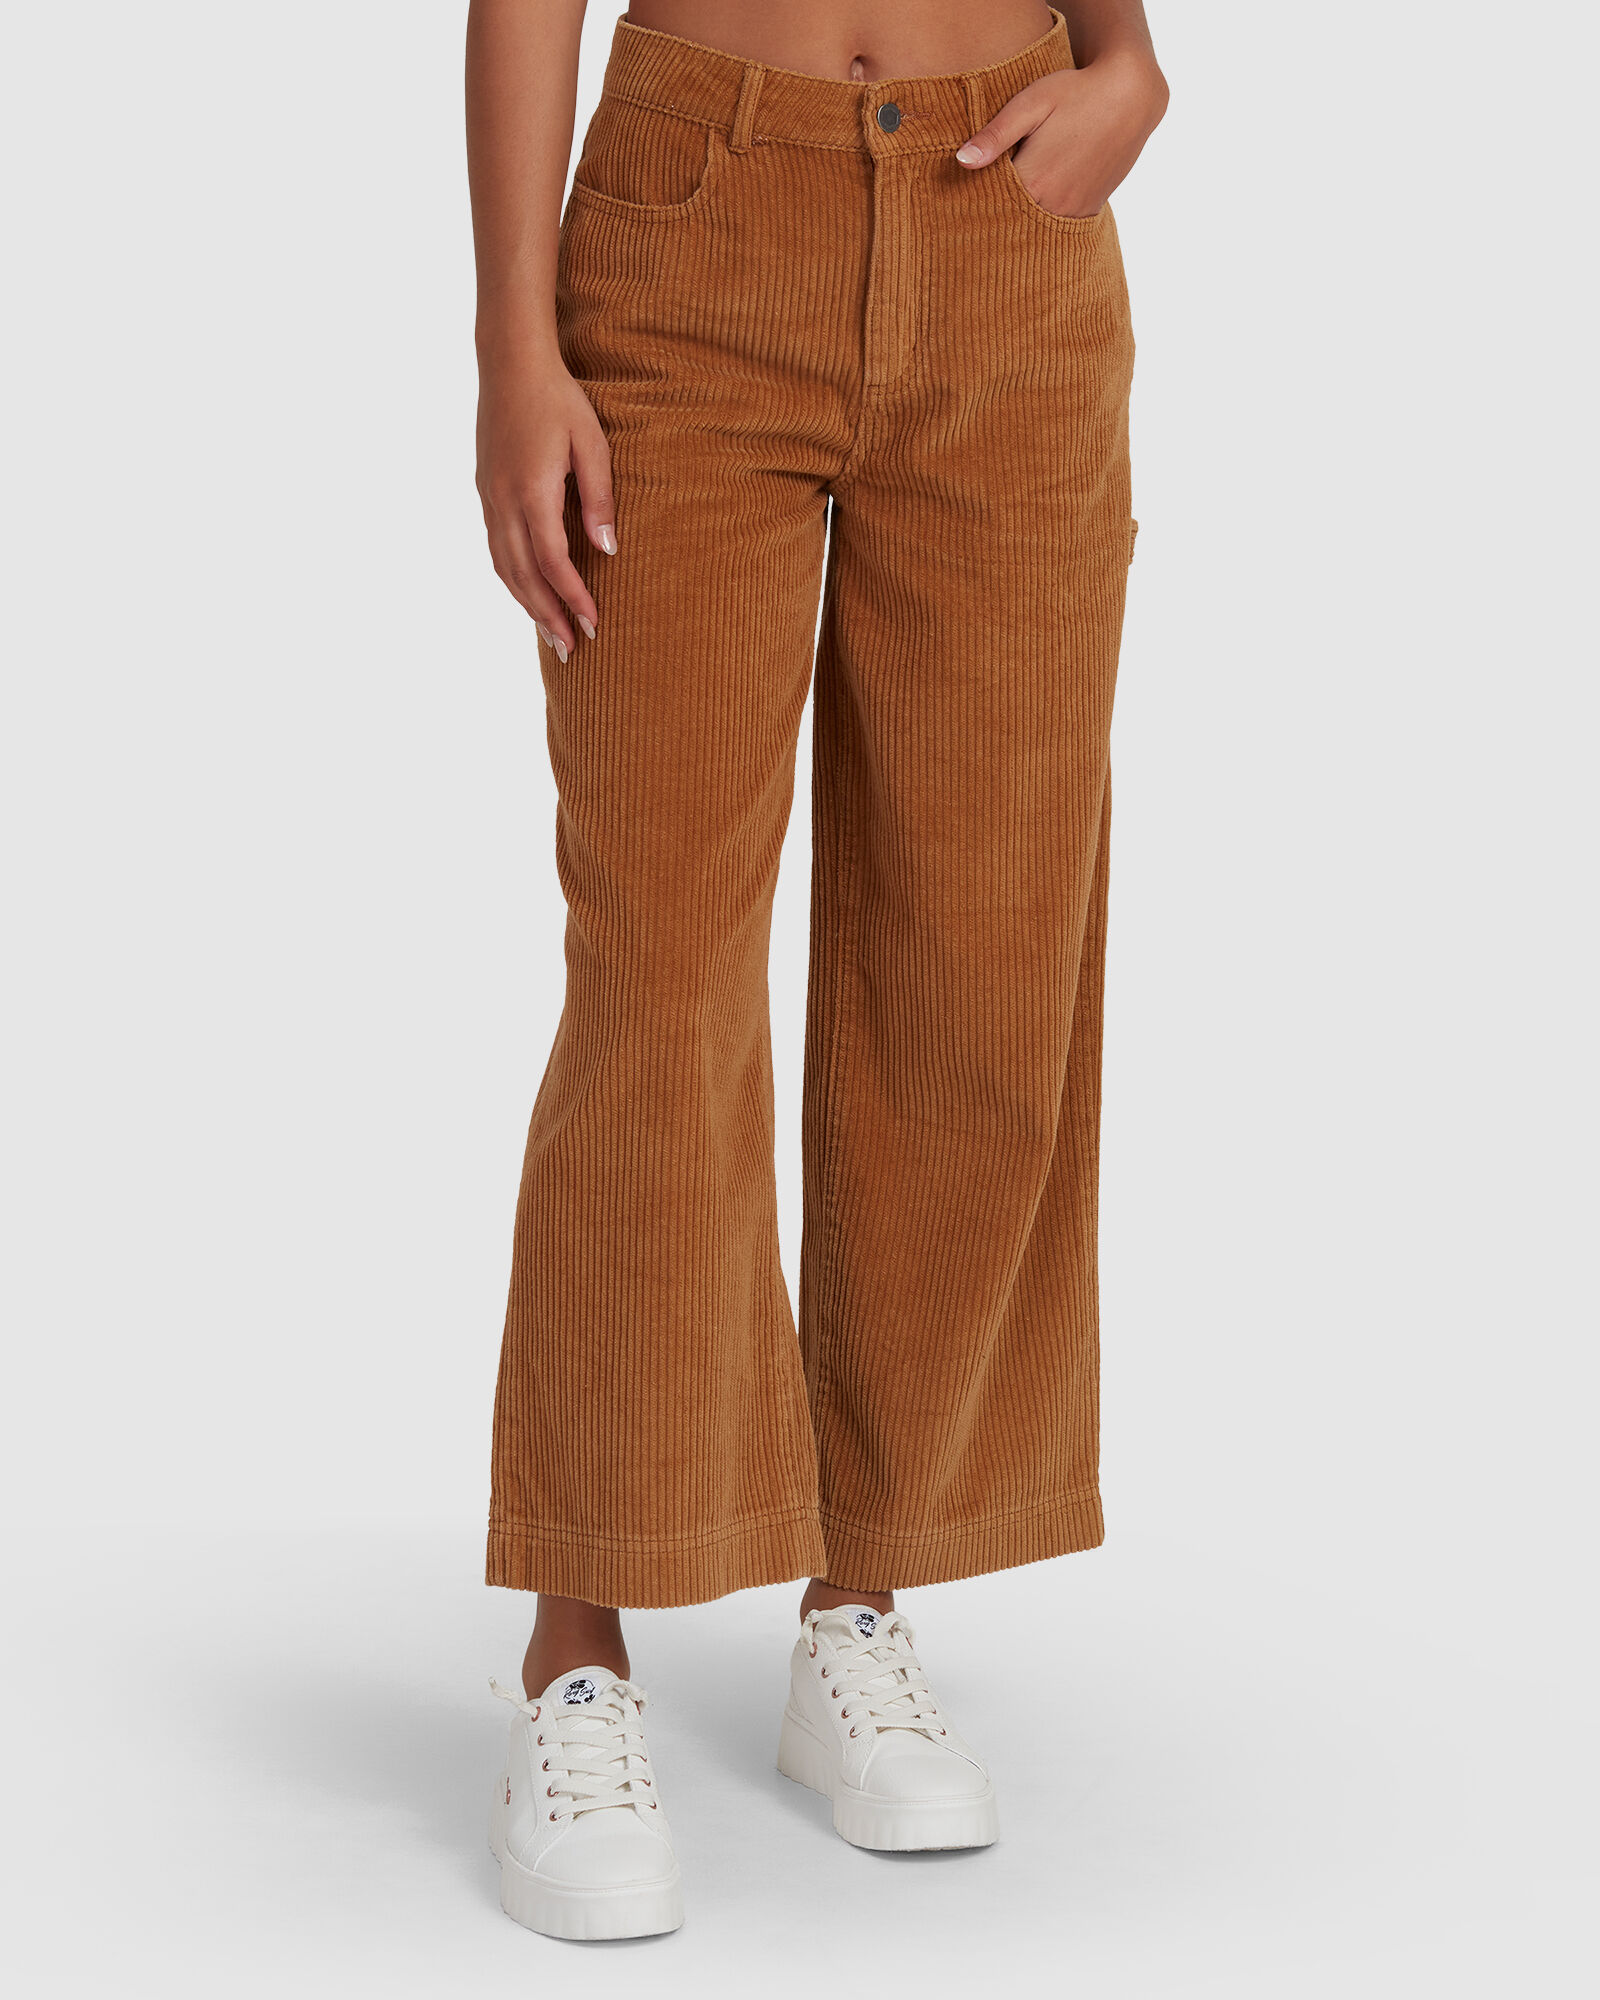 Buy Corduroy Pants for Women Online In India  Etsy India